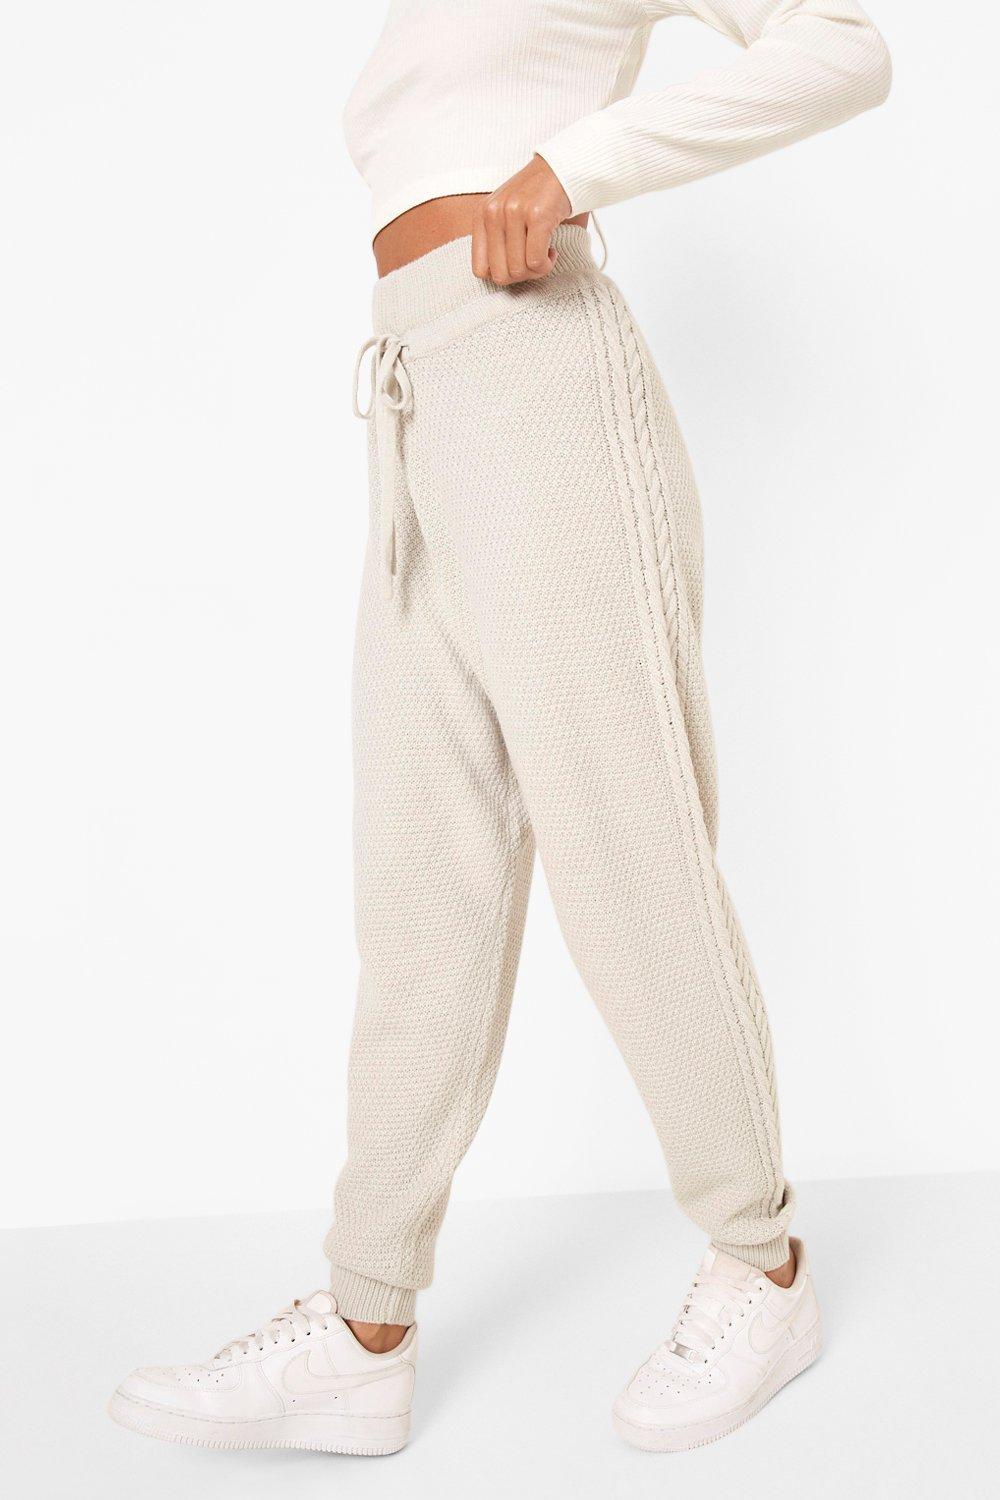 Grey Cable Knit Joggers